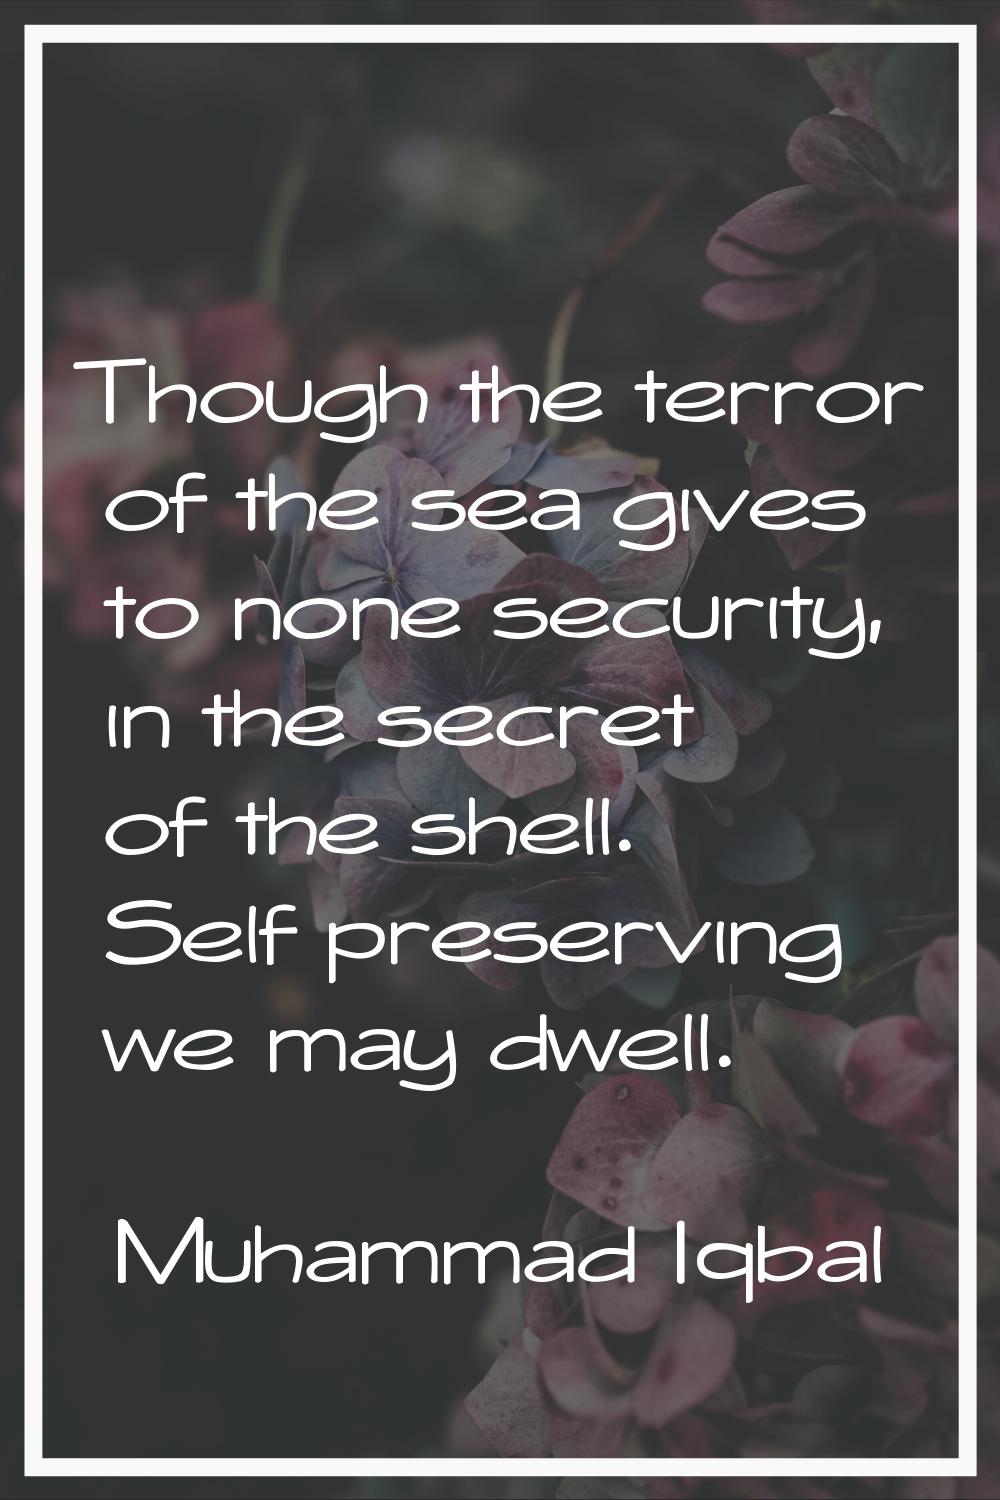 Though the terror of the sea gives to none security, in the secret of the shell. Self preserving we